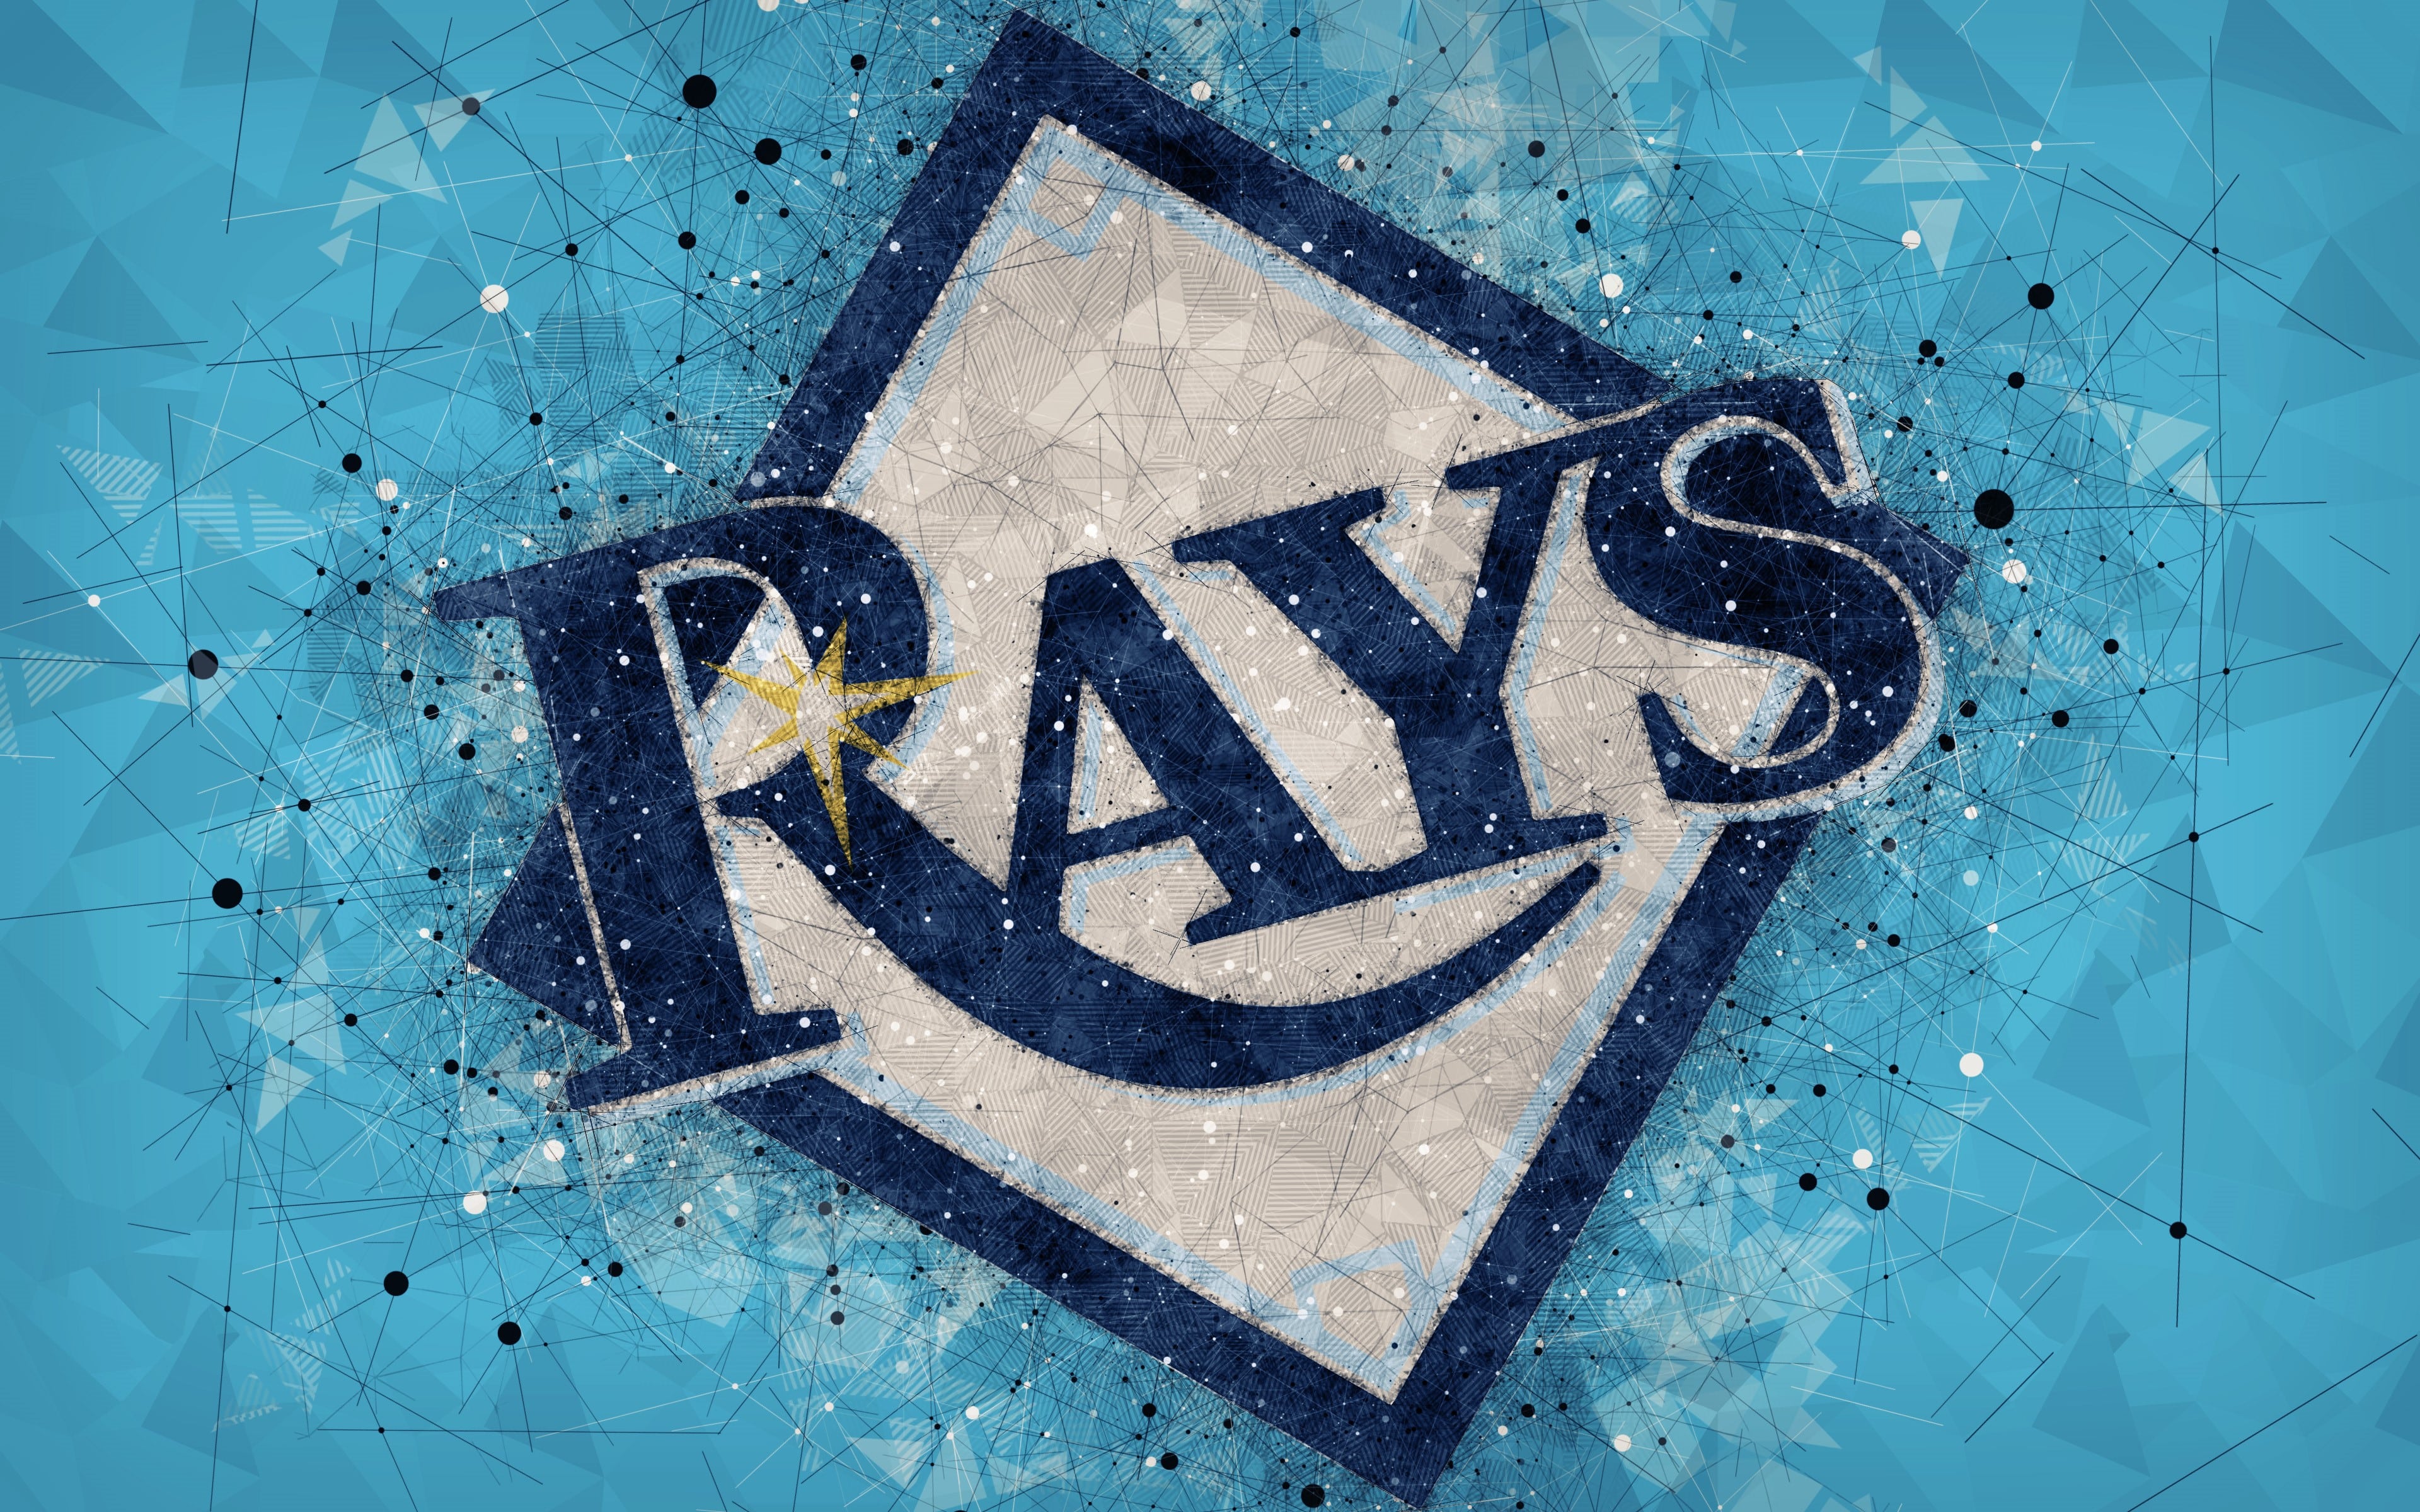 Tampa Bay Rays 4k Wallpapers Kolpaper Awesome Free Hd Wallpapers